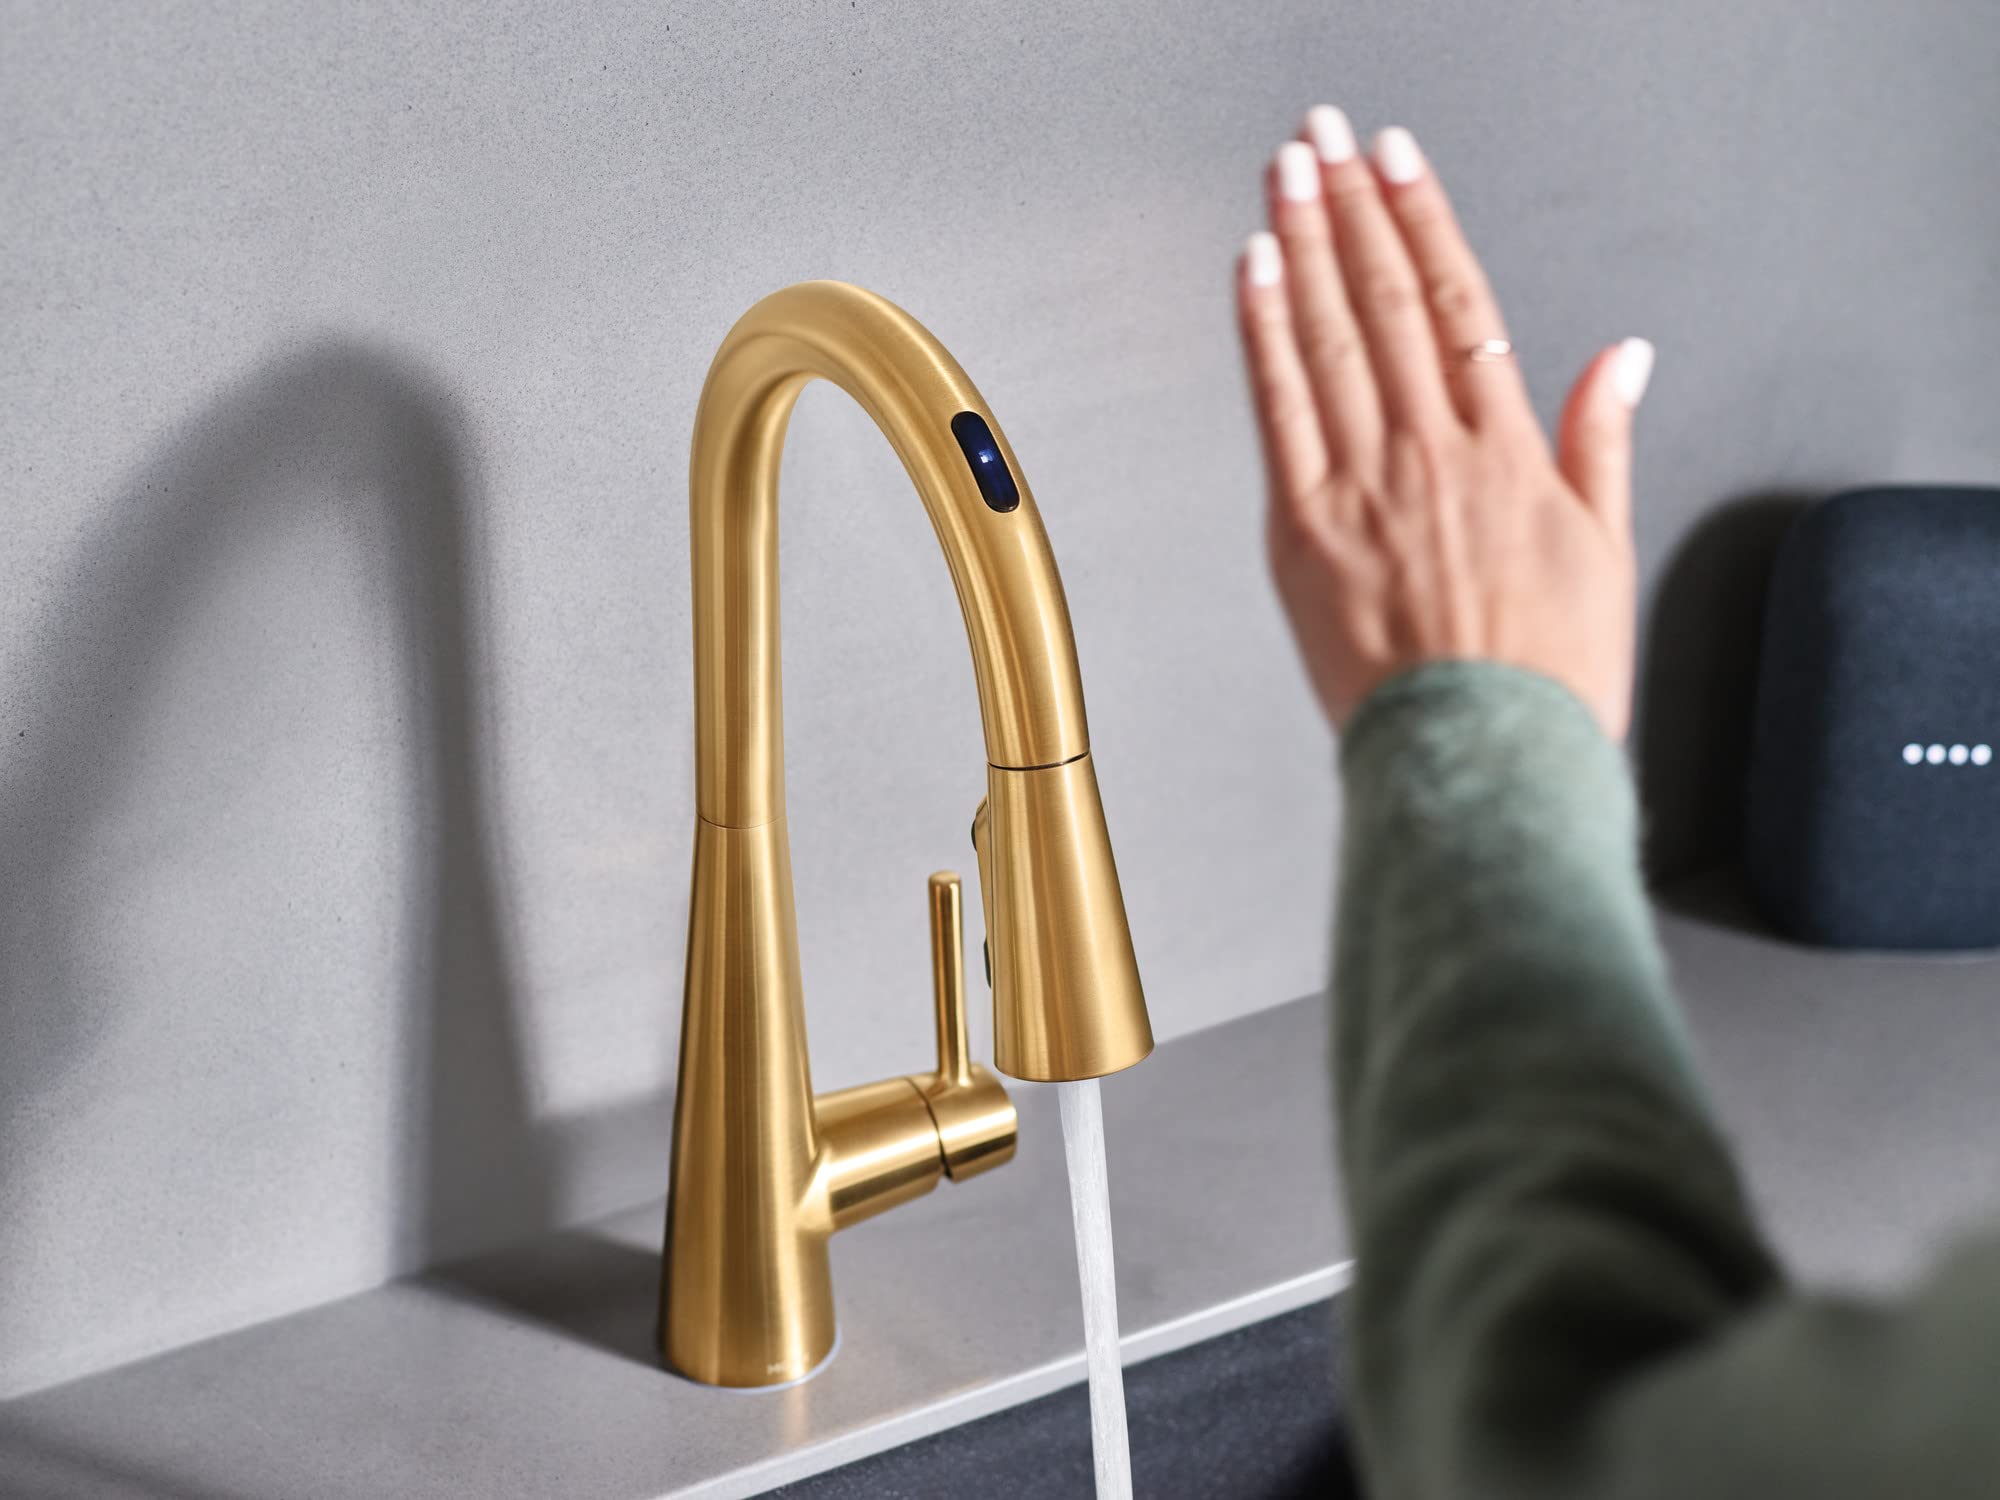 Moen 7864EVBG Sleek Smart Touchless Pull Down Sprayer Kitchen Faucet with Voice Control and Power Boost, Brushed Gold